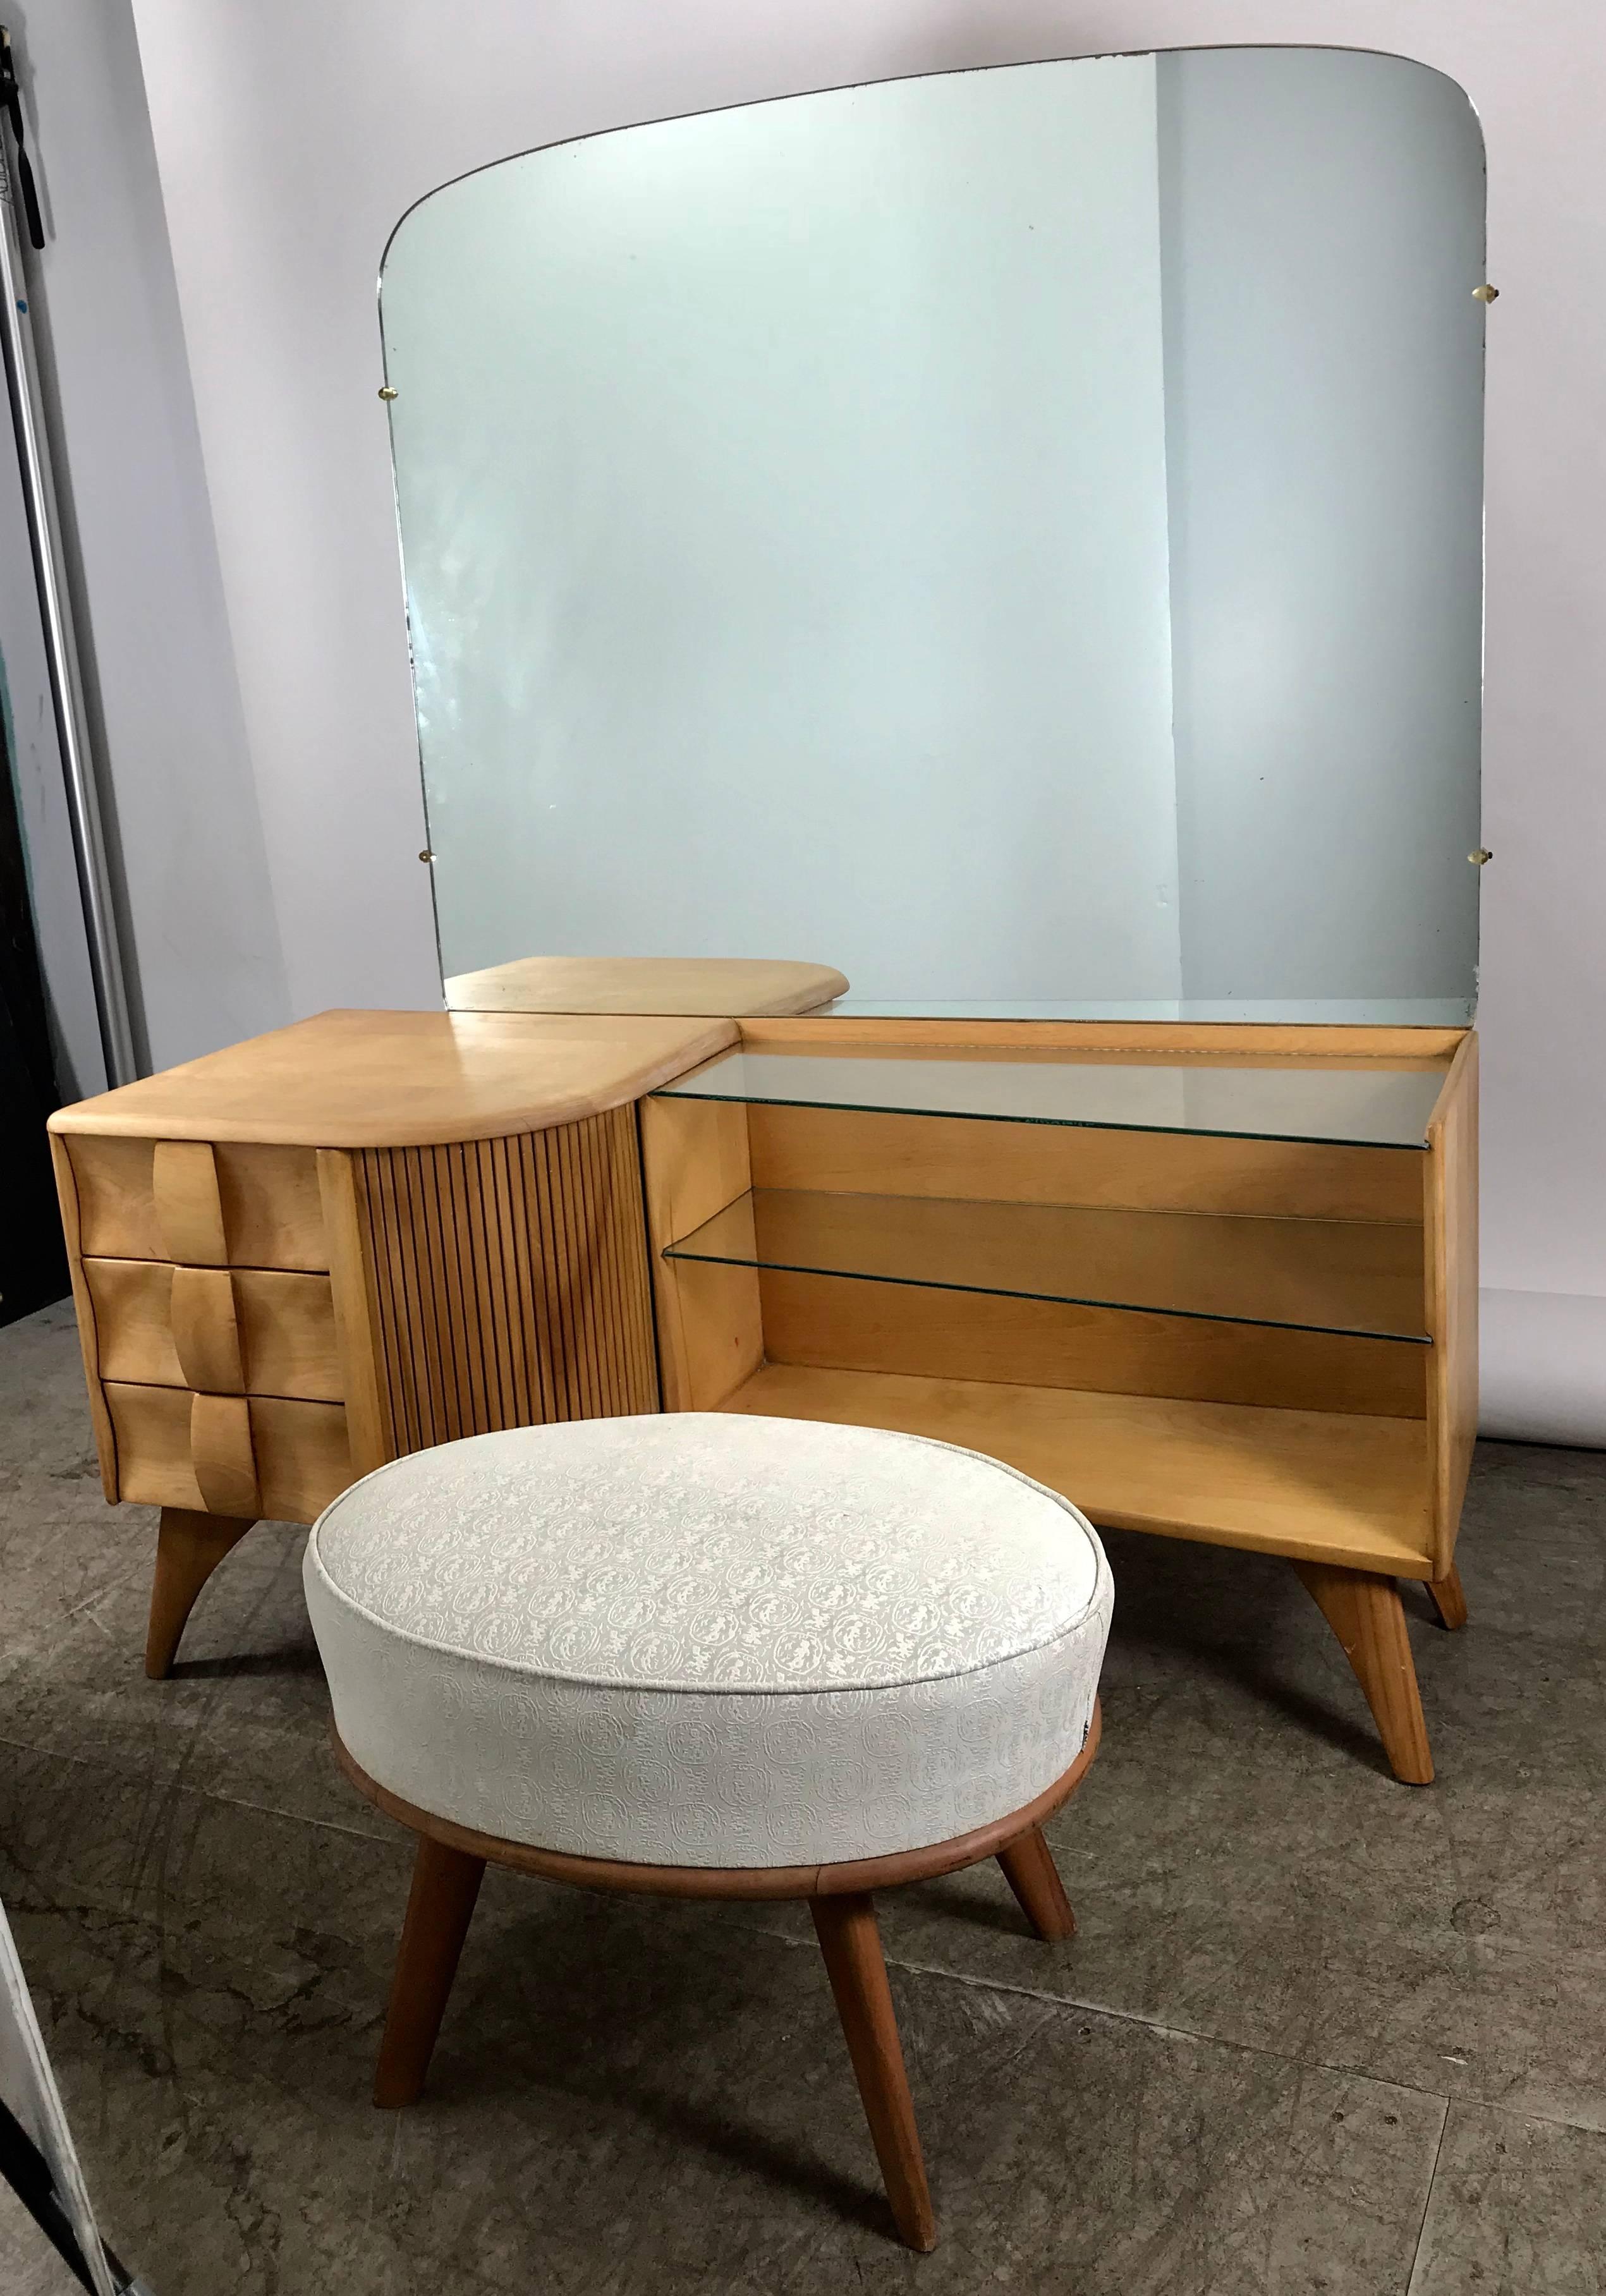 Classic Heywood Wakefield Mid-Century Modern vanity, dressing table. Beautiful refinished solid birch wood, oiled rubbed finish, features amazing sculpted drawers, tambour door, two glass shelves, large mirror. Hand delivery avail to New York City